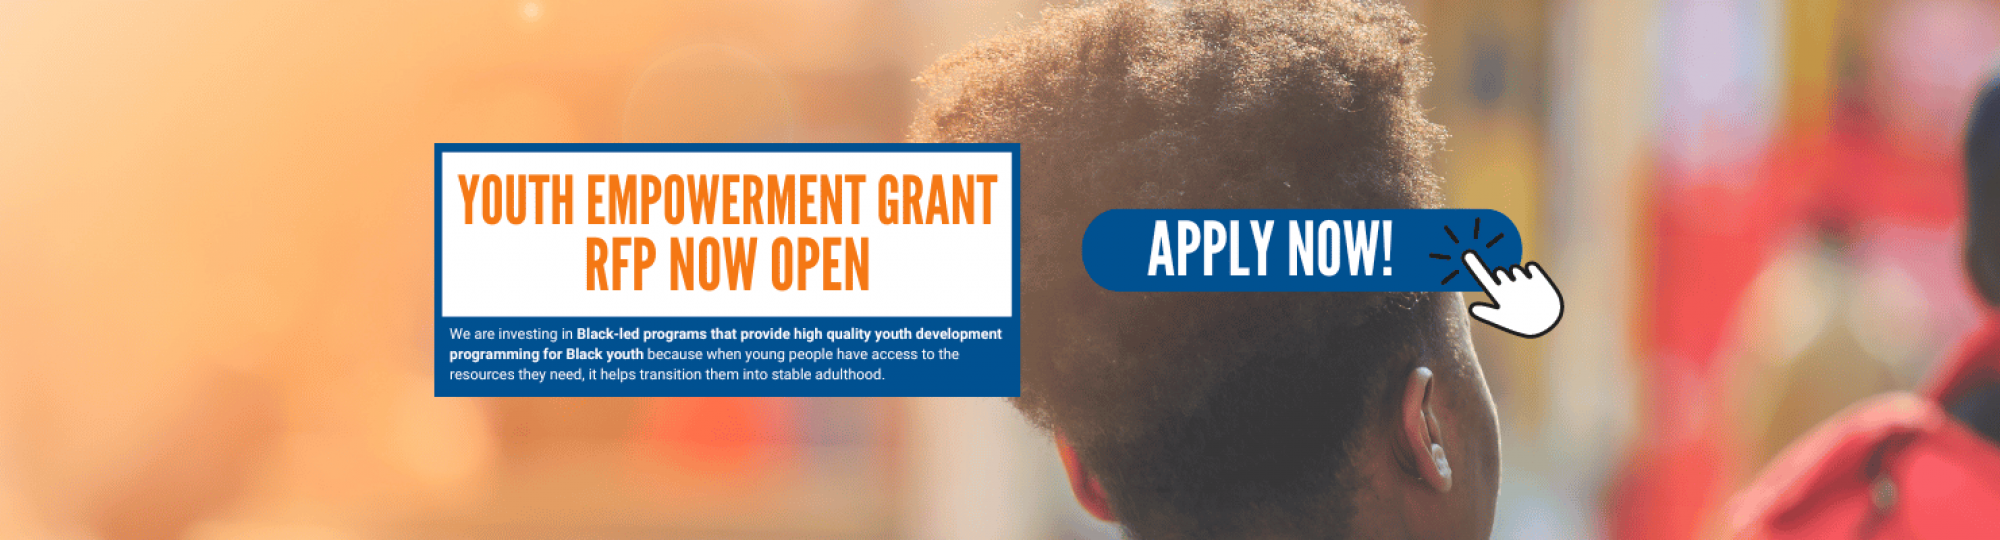 Youth Empowerment Grant RFP Now Open